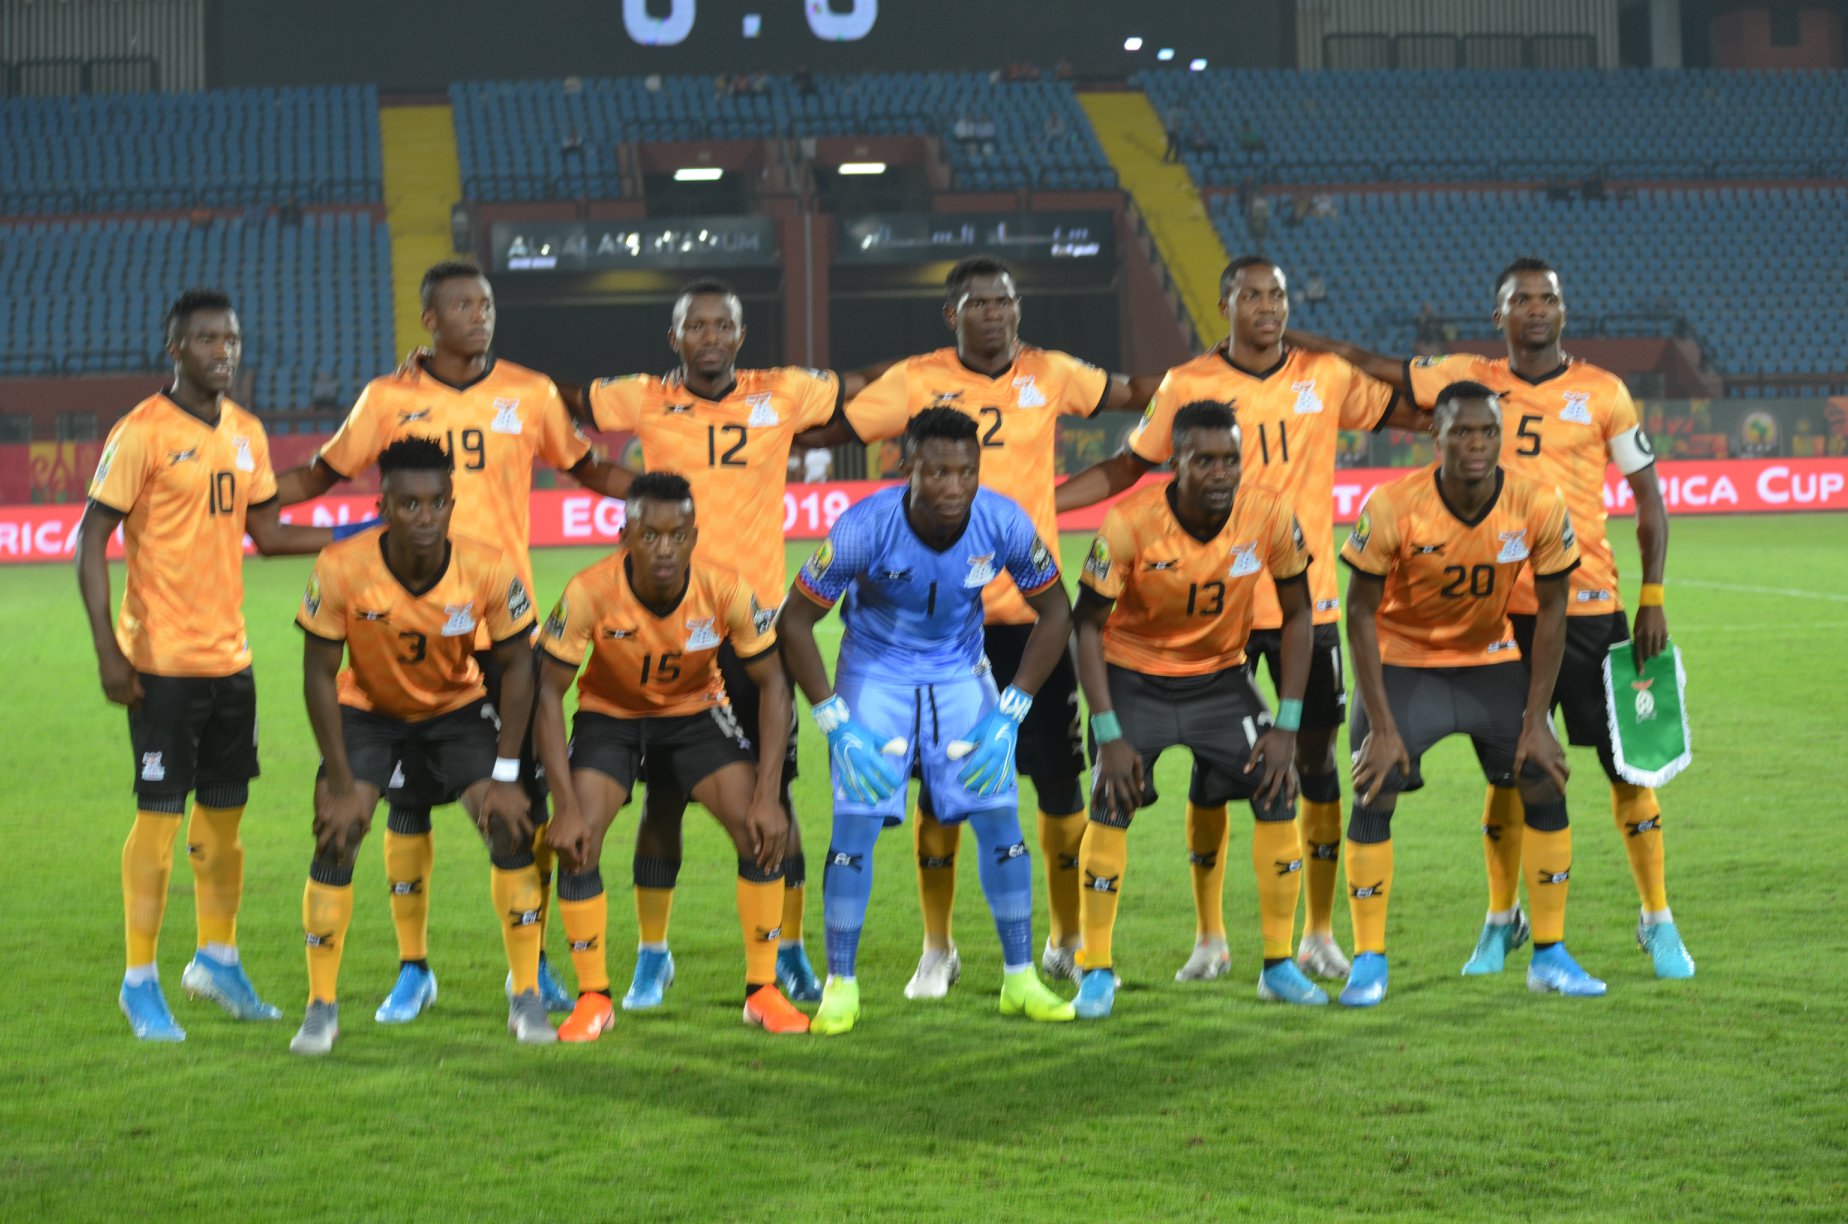 Zambia national team Chipolopolo posing for a group photo before the game.